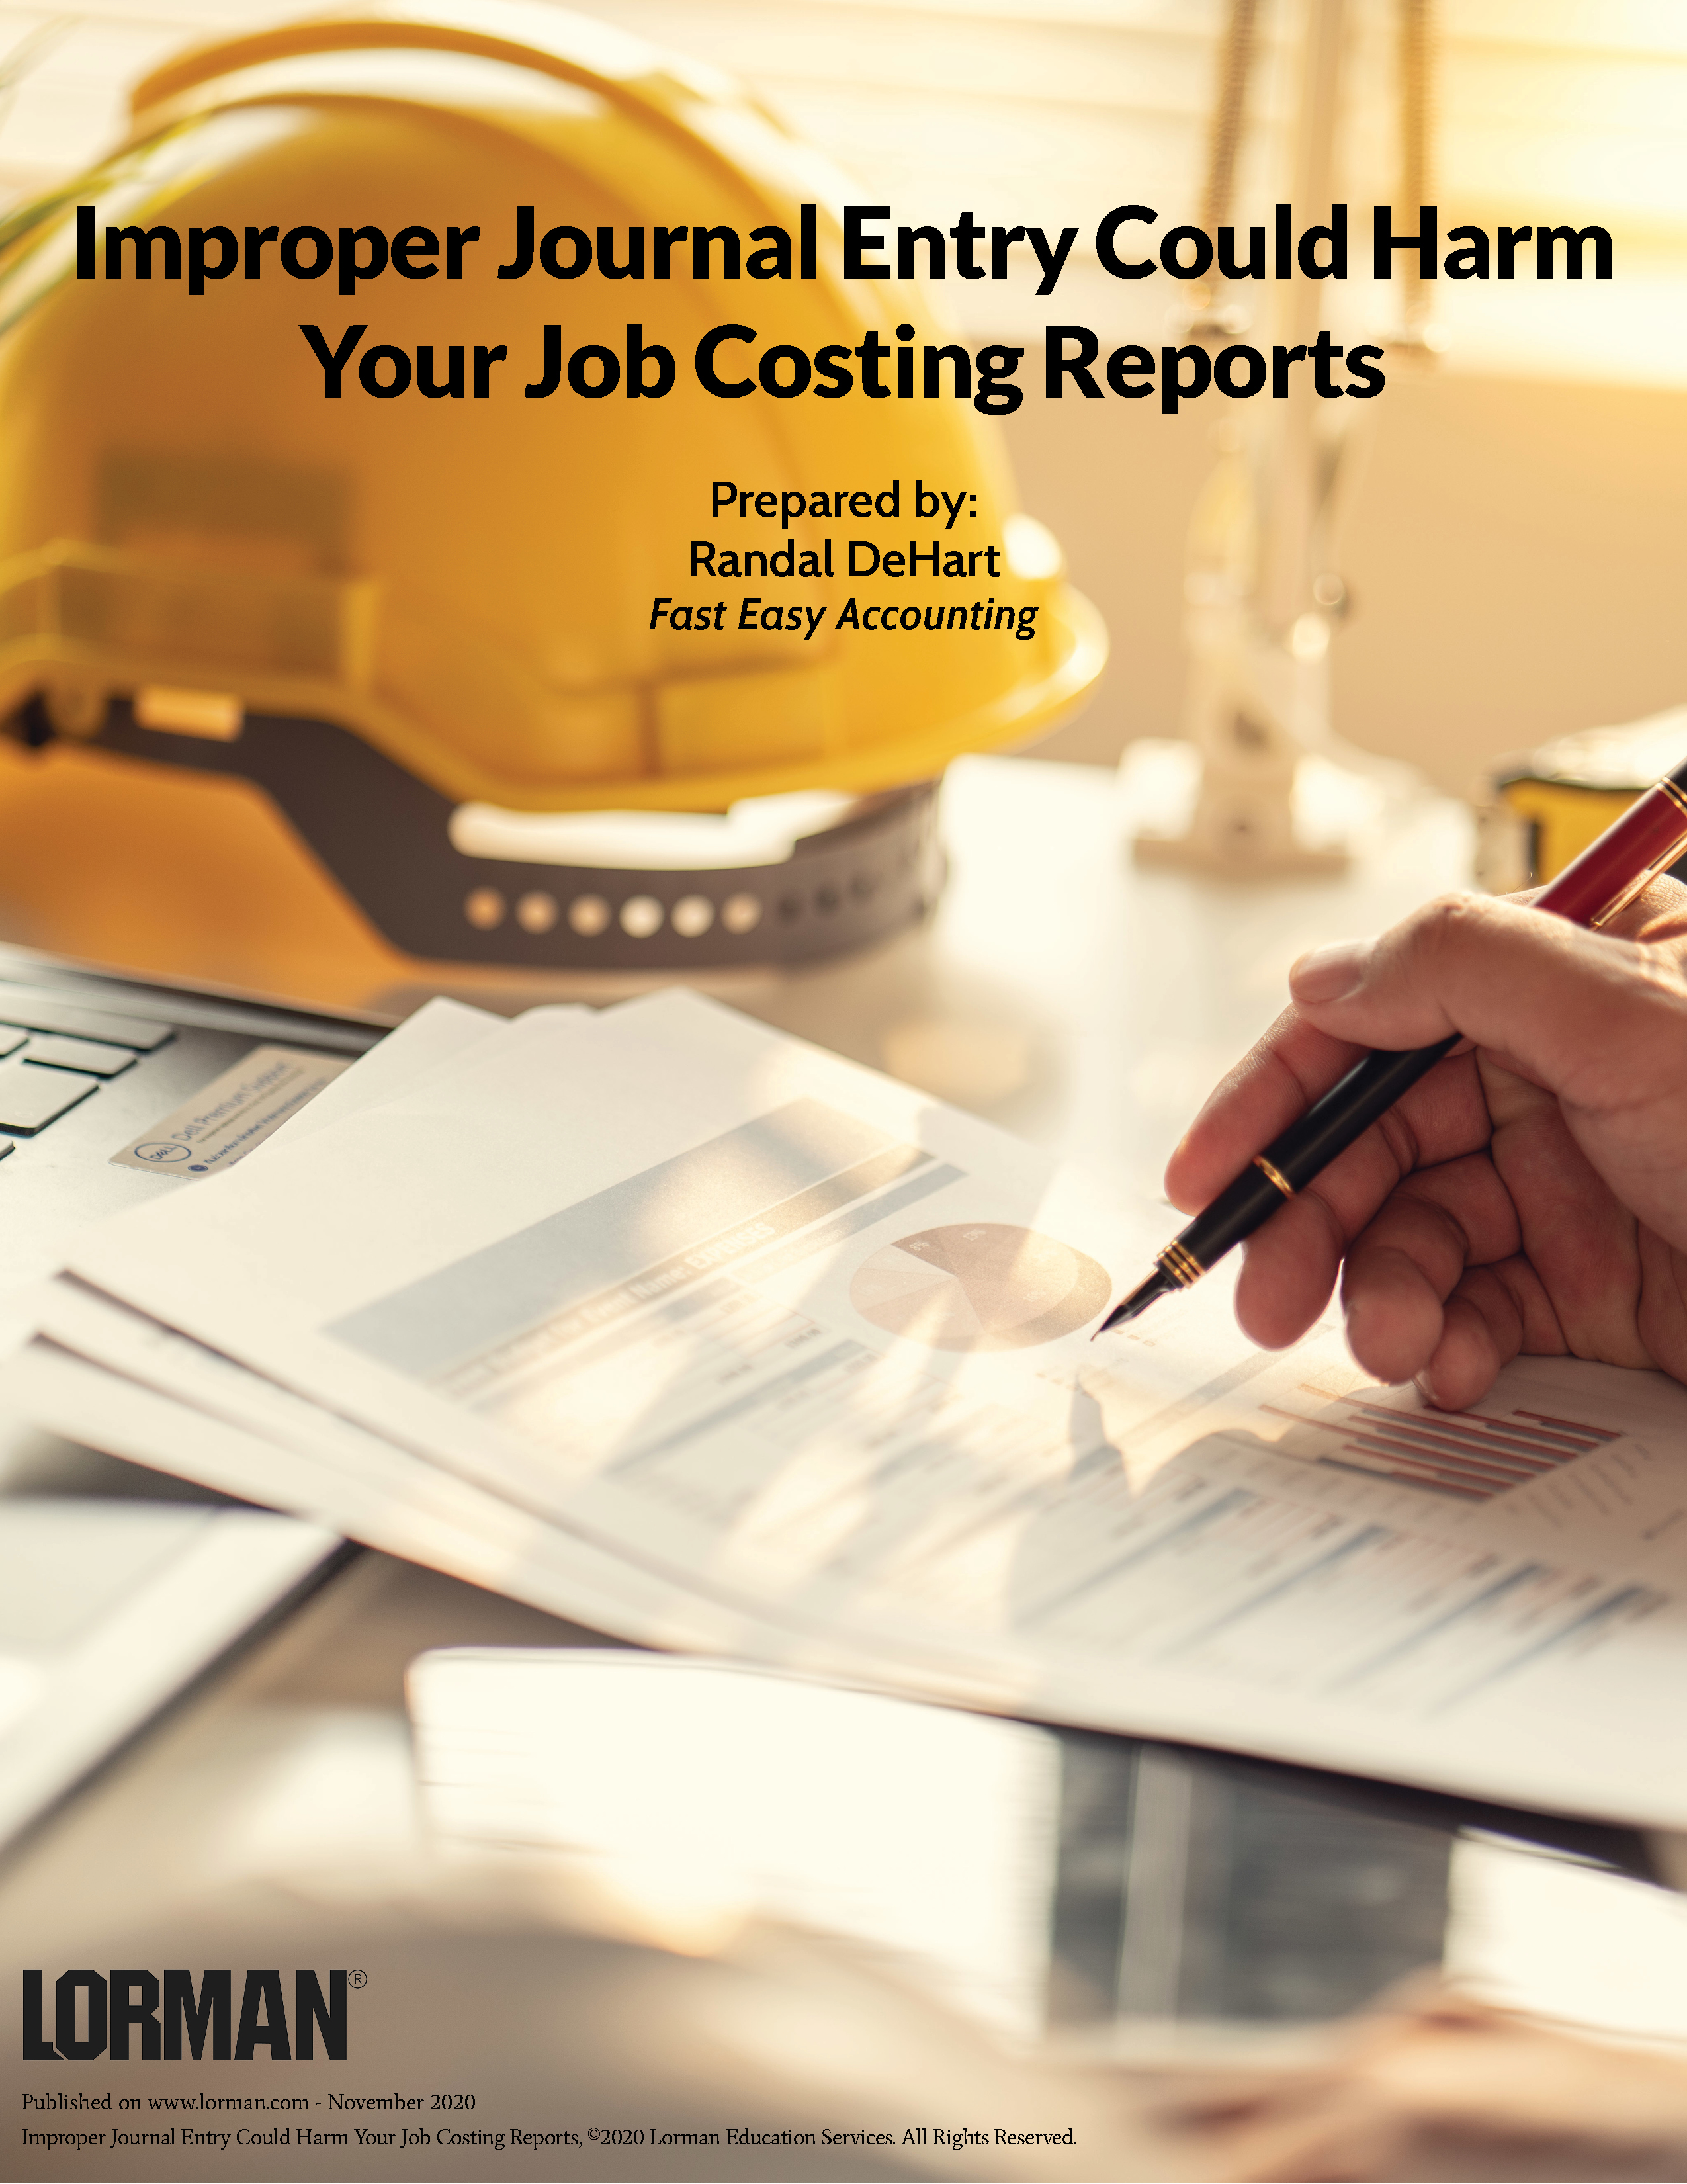 Improper Journal Entry Could Harm Your Job Costing Reports